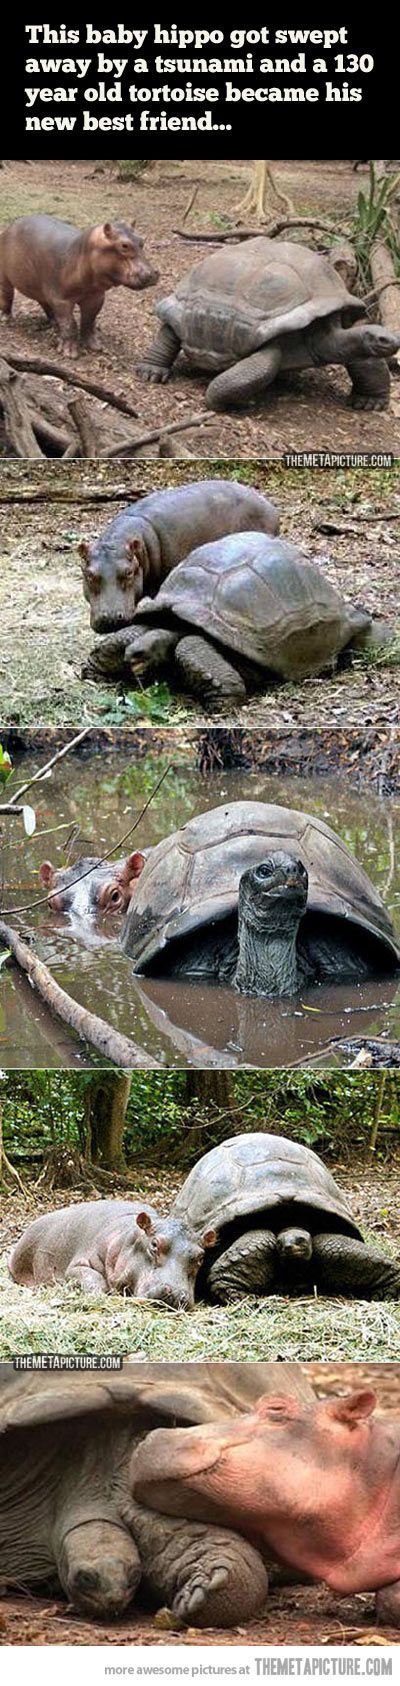 Baby hippo and 130 year old tortoise become best friends